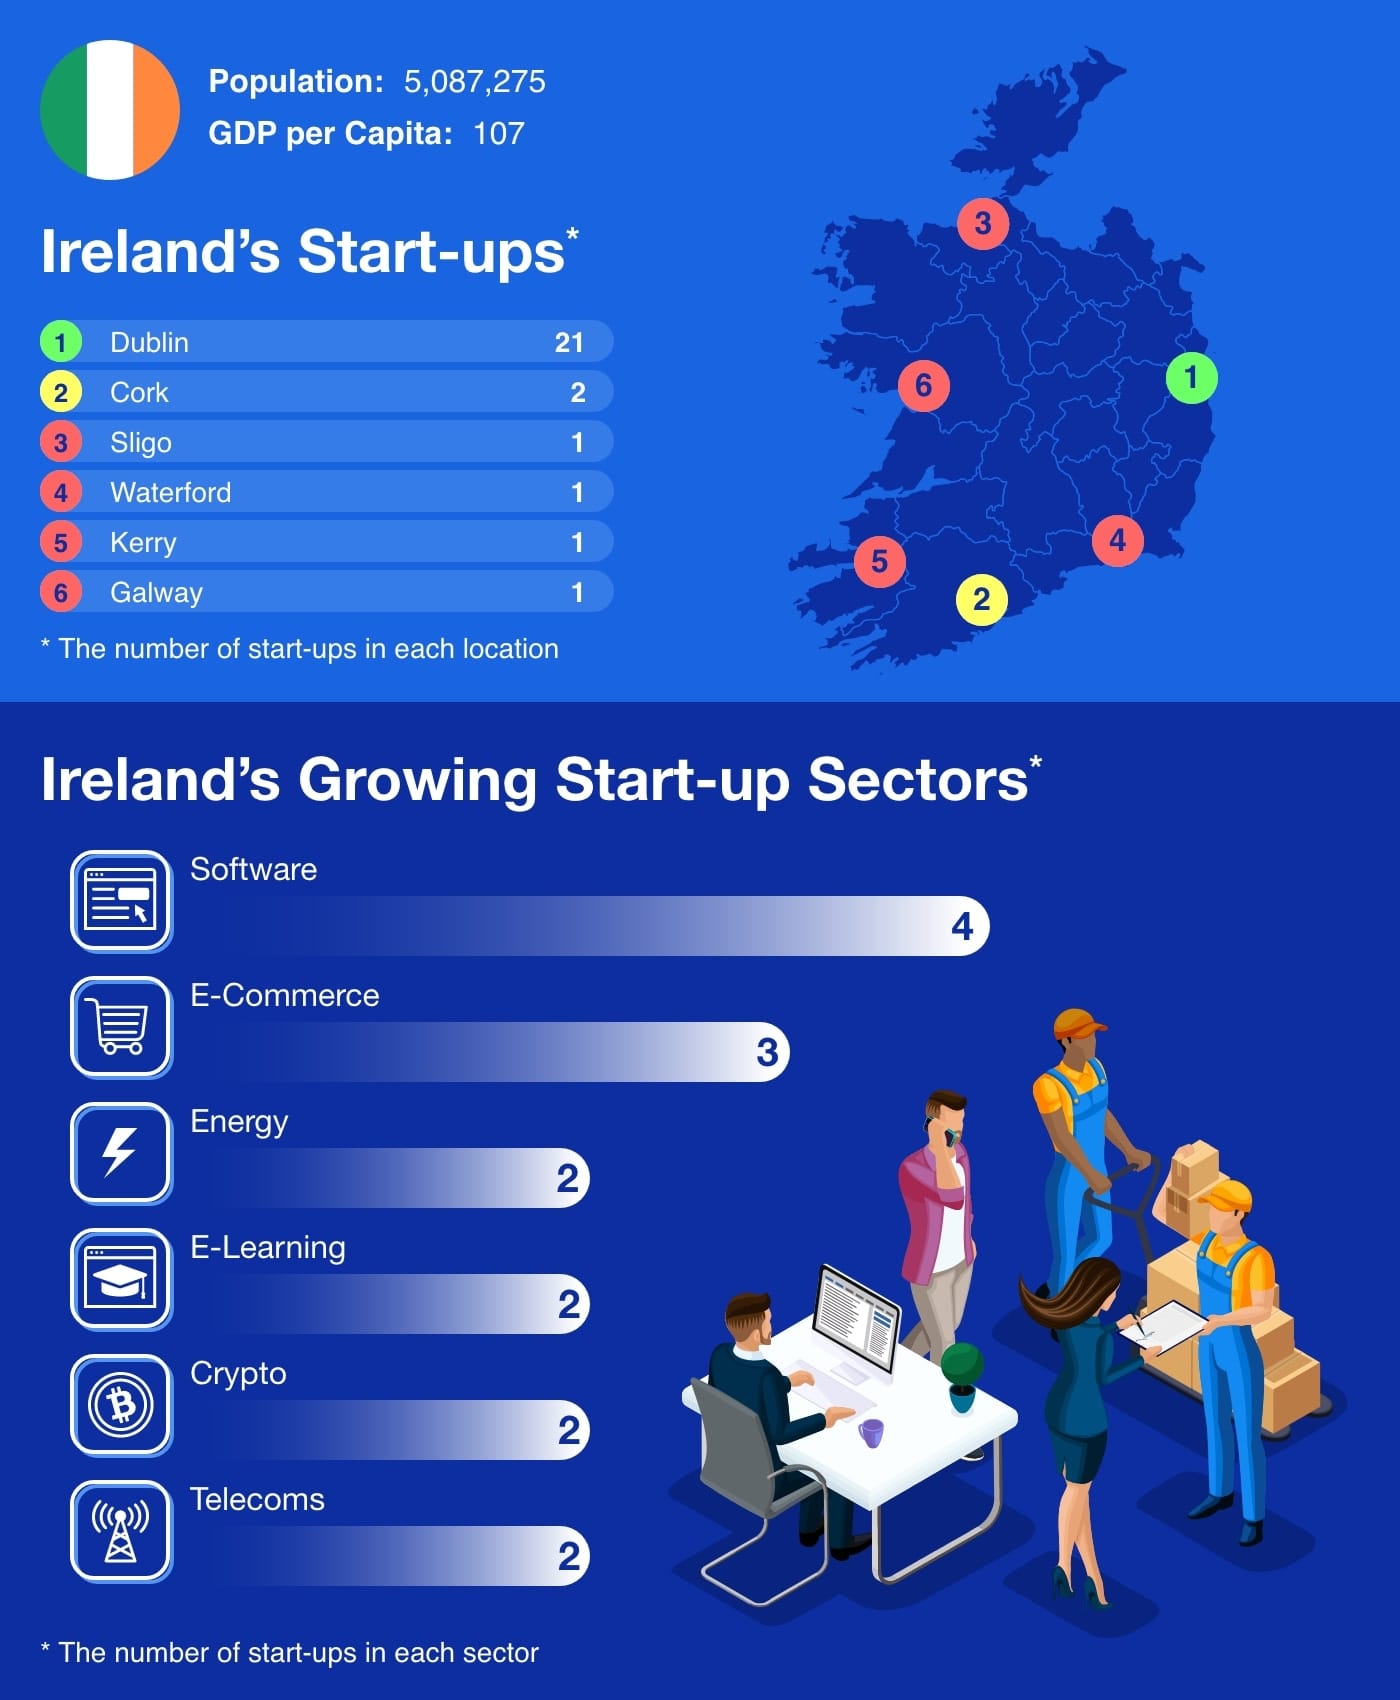 Infographic showing the number of Ireland's start-ups by location and sector